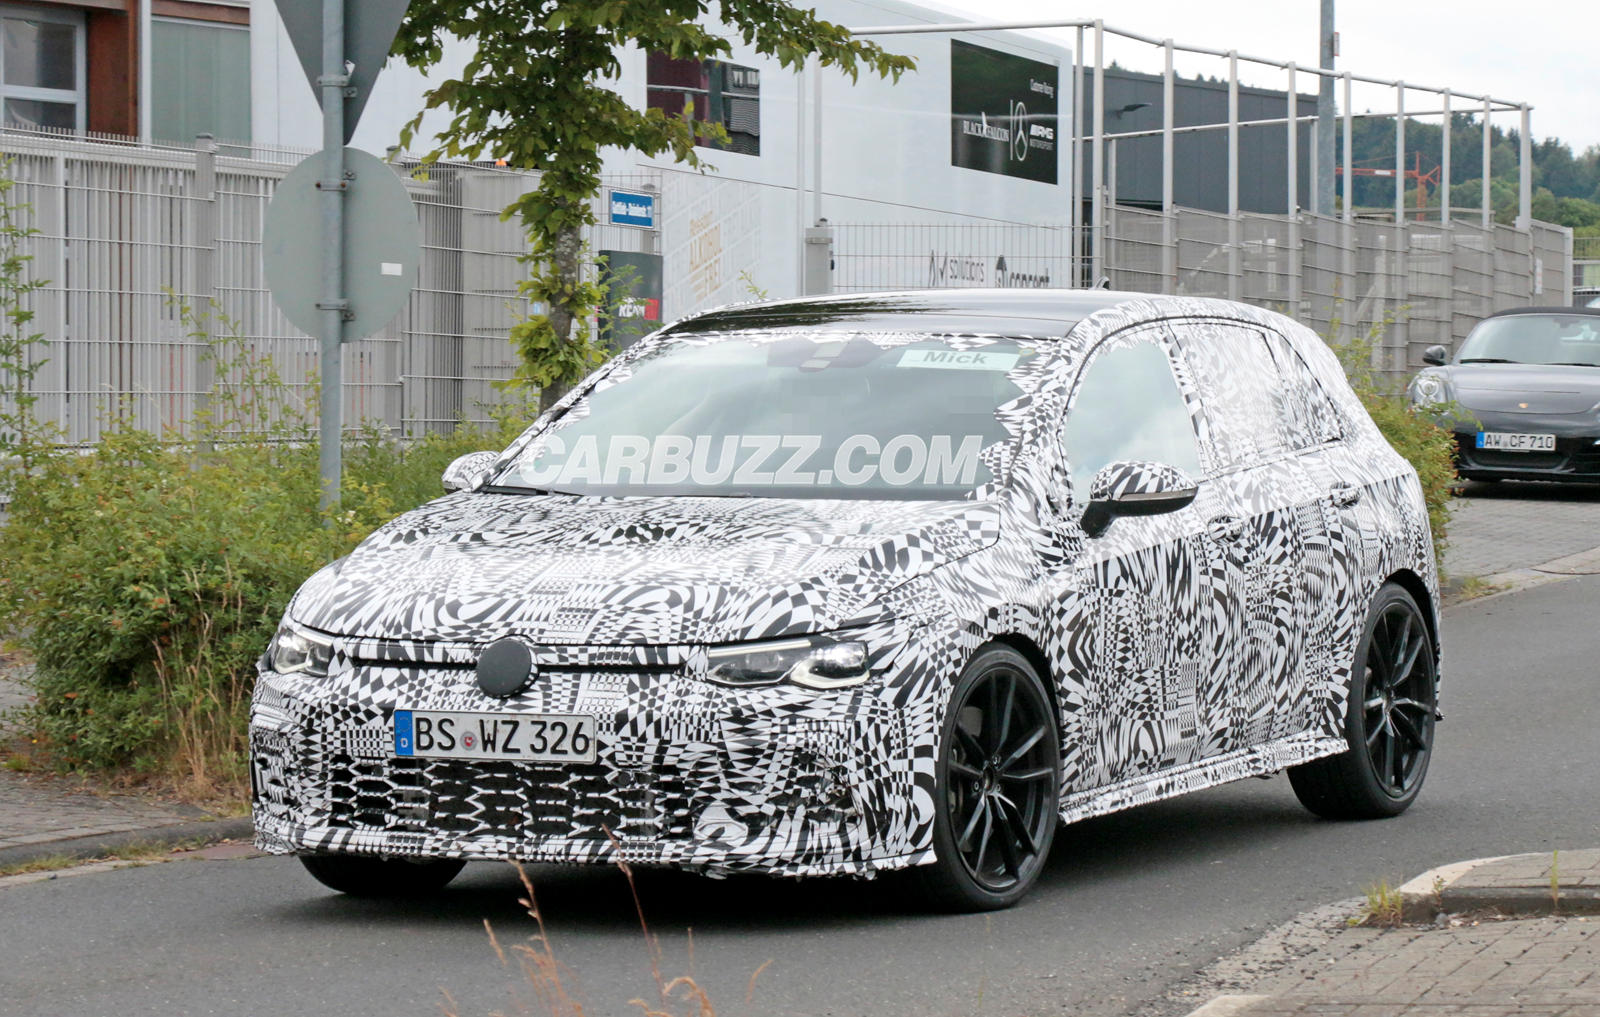 Get Excited For The Next-Generation Volkswagen Golf GTI